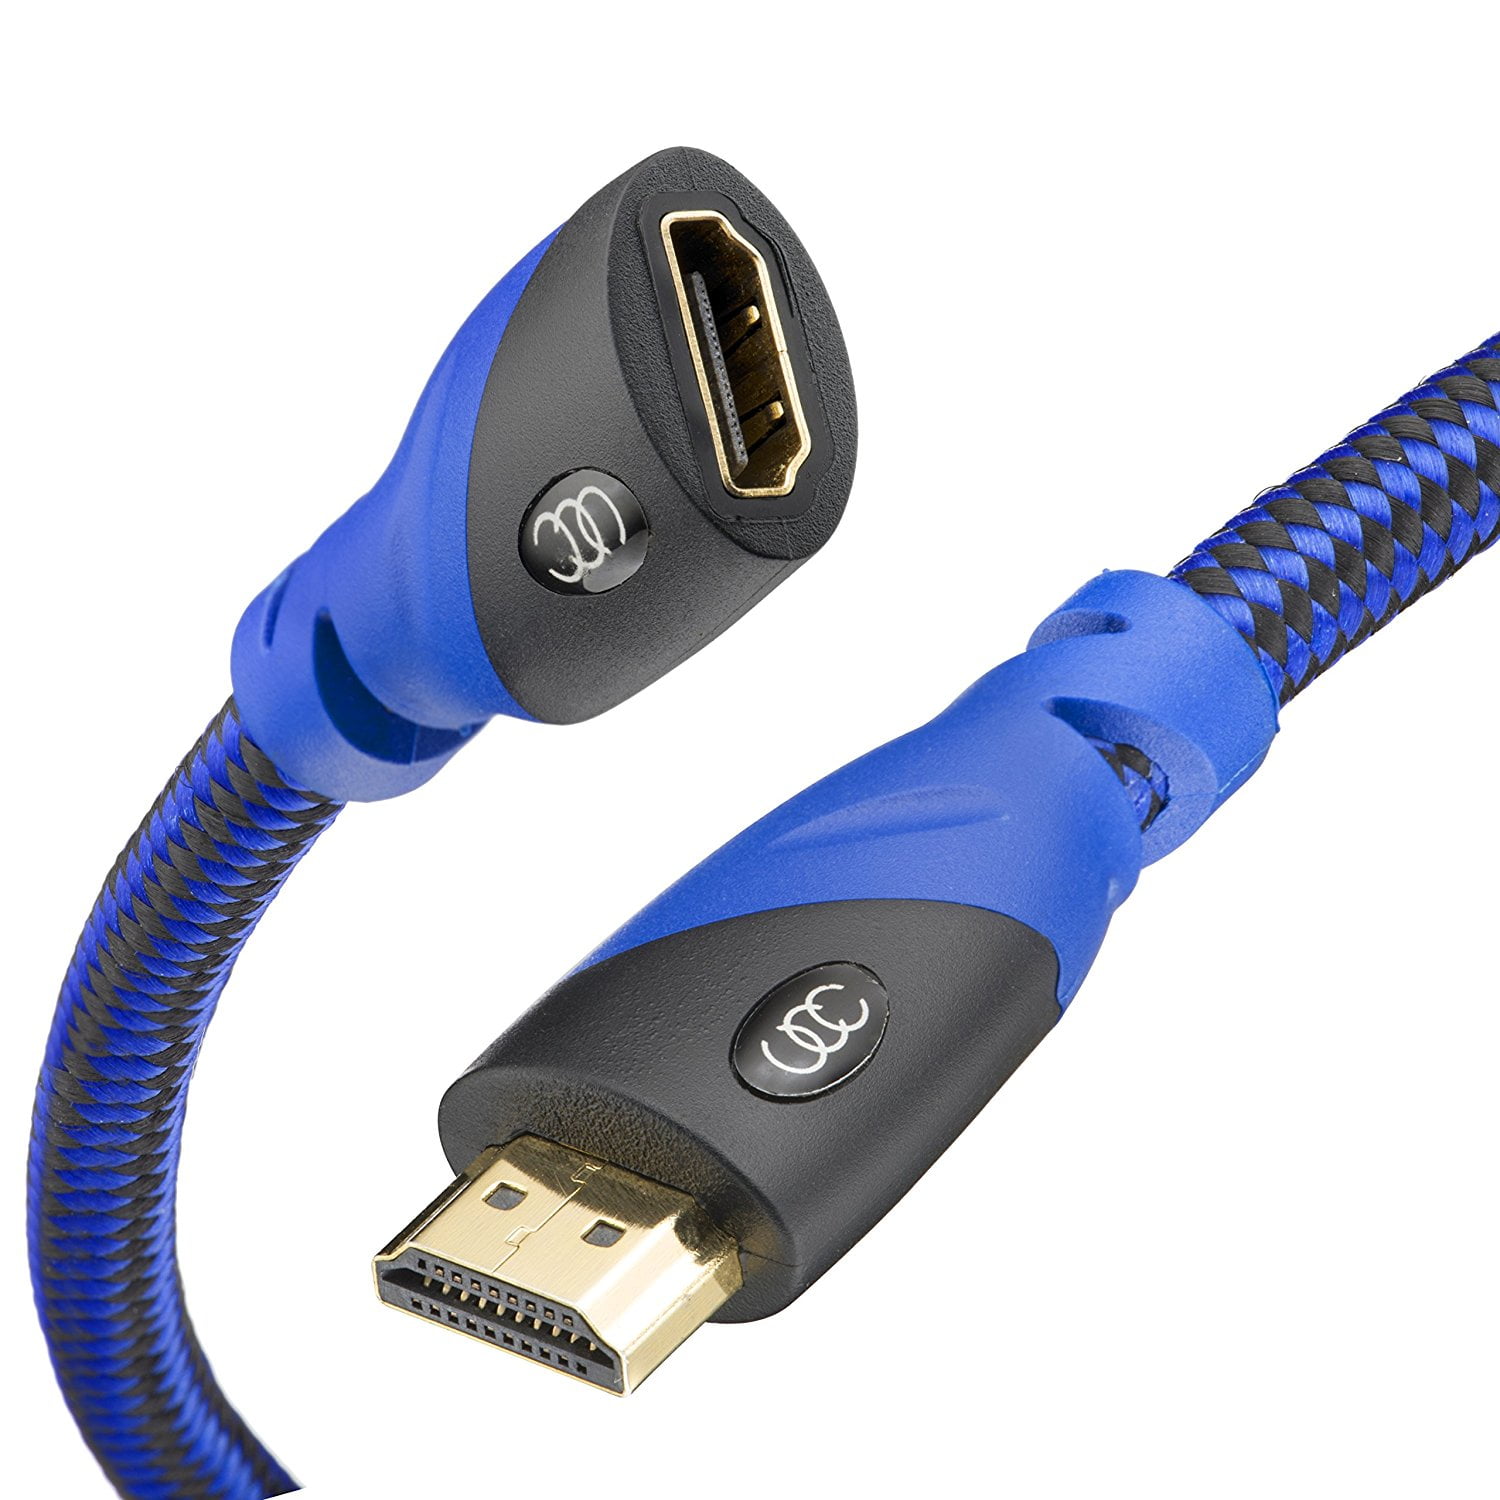 High Speed Hdmi Cable 1 Pack 4K Resolution 2.0b Ready 10 Feet Audio Return Channel Hdcp 2.2 Compliant HDMI Cable 10 ft Supports Ethernet Ultra HDR Video HD Bandwidth 18Gbps 3 Meters 